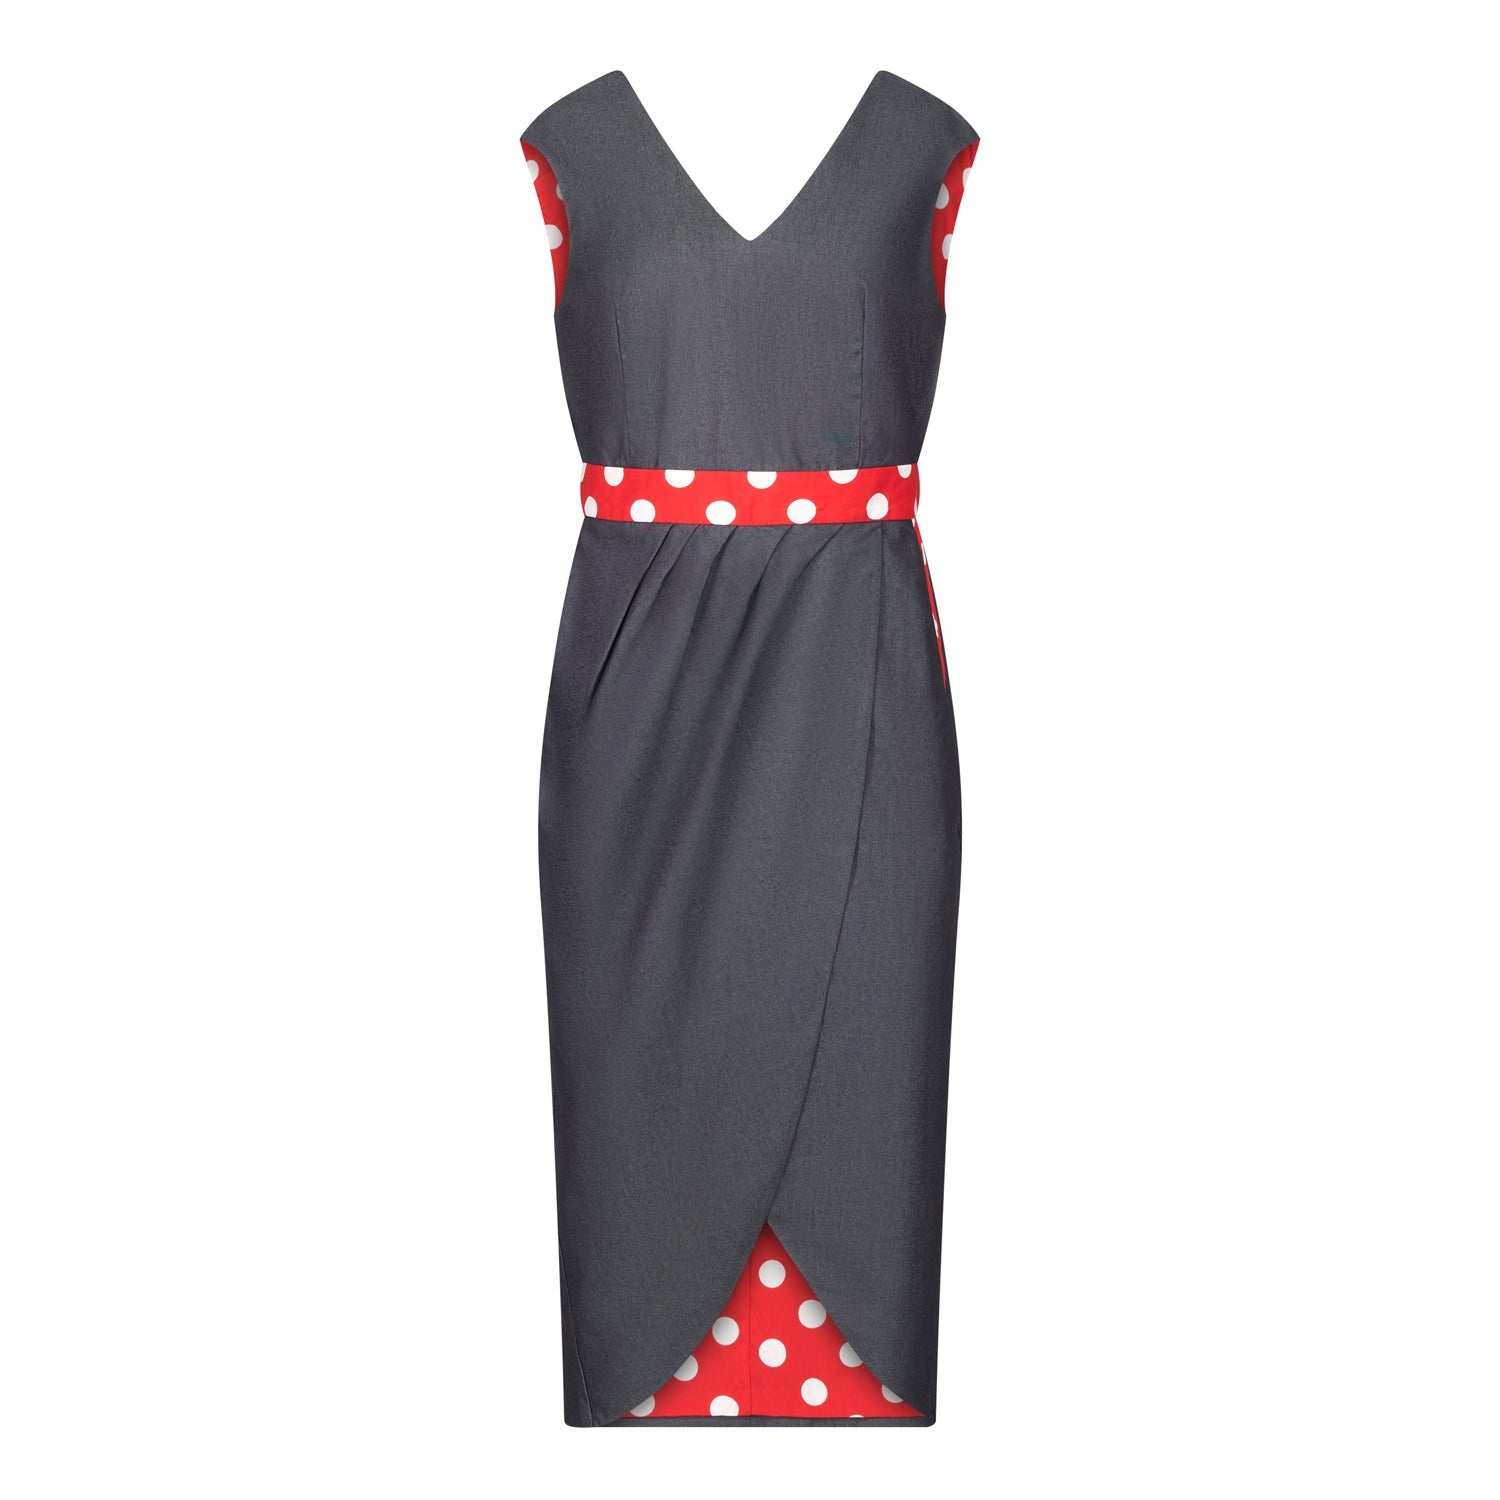 Denim Illusion wrap dress with Red and White Spot contrast fabric, front view